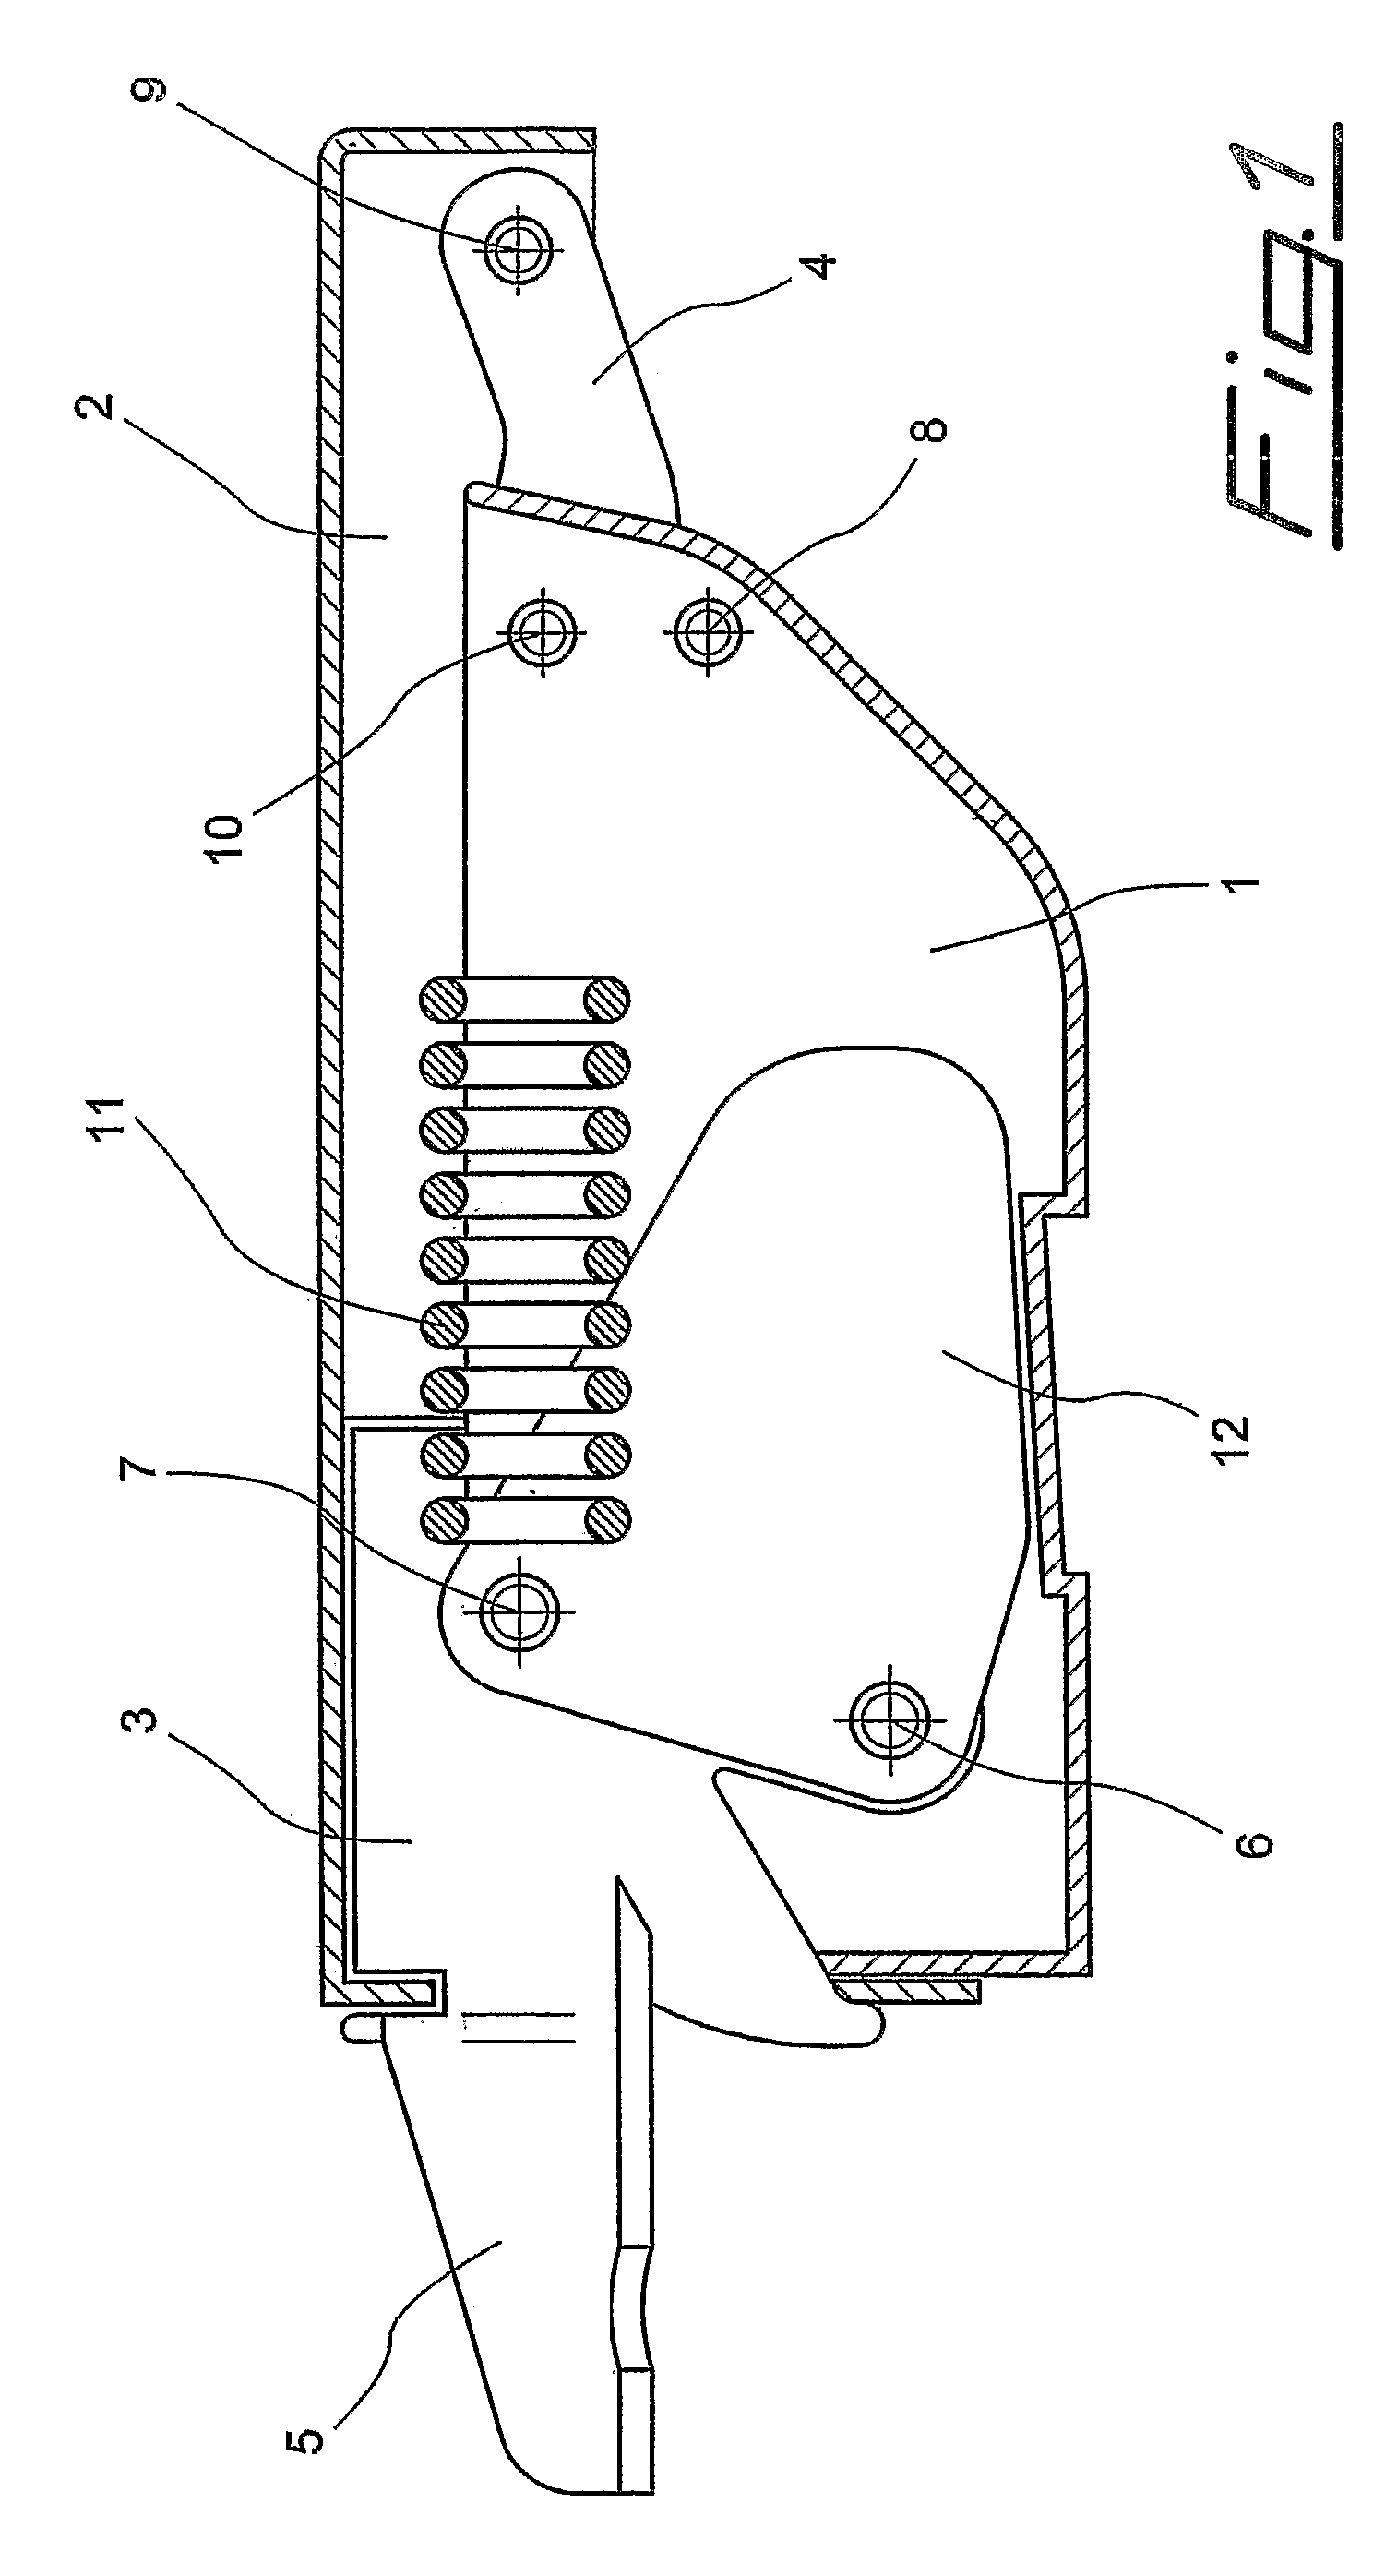 Device for synchronizing the tilt of a chair back and seat